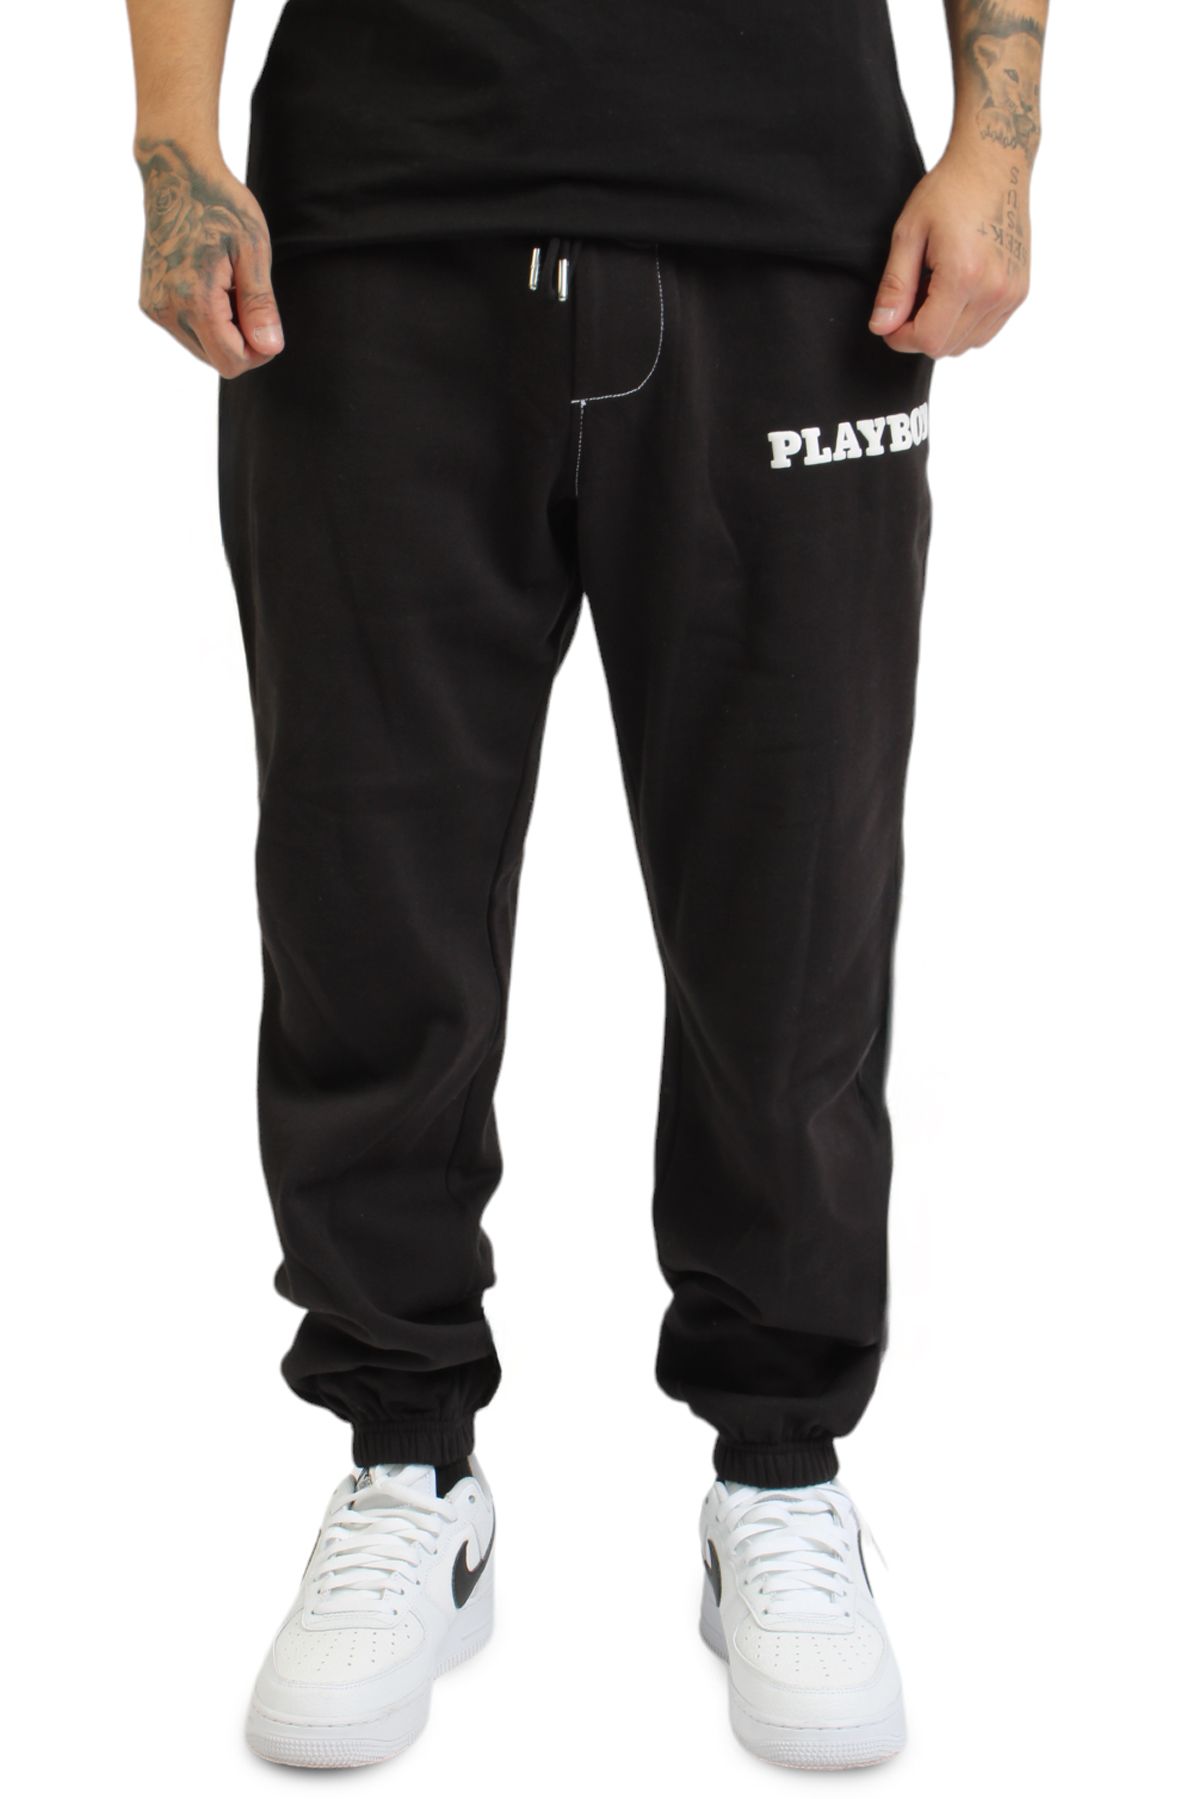 True Religion Jogger Athletic Sweatsuits for Women